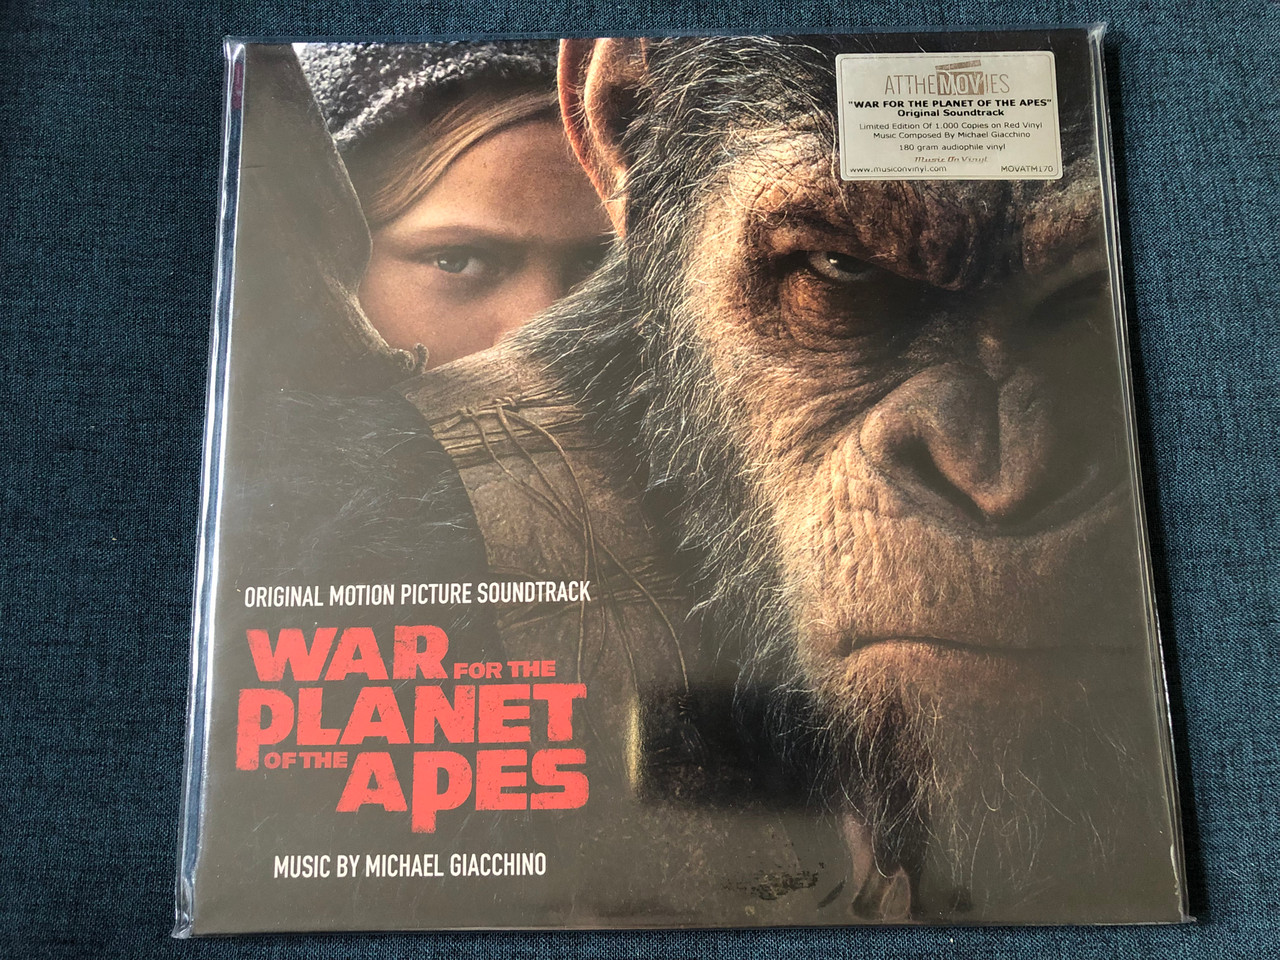 https://cdn10.bigcommerce.com/s-62bdpkt7pb/products/0/images/243217/War_For_The_Planet_Of_The_Apes_Original_Motion_Picture_Soundtrack_-_Music_By_Michael_Giacchino_Limited_Edition_Of_1.000_Copies_on_Red_Vinyl_180_gram_audiophile_vinyl_At_The_Movies_Musi_1__96223.1658932455.1280.1280.JPG?c=2&_gl=1*1bciu8o*_ga*MjA2NTIxMjE2MC4xNTkwNTEyNTMy*_ga_WS2VZYPC6G*MTY1ODkyOTg1NC41MDAuMS4xNjU4OTMyNDQyLjYw